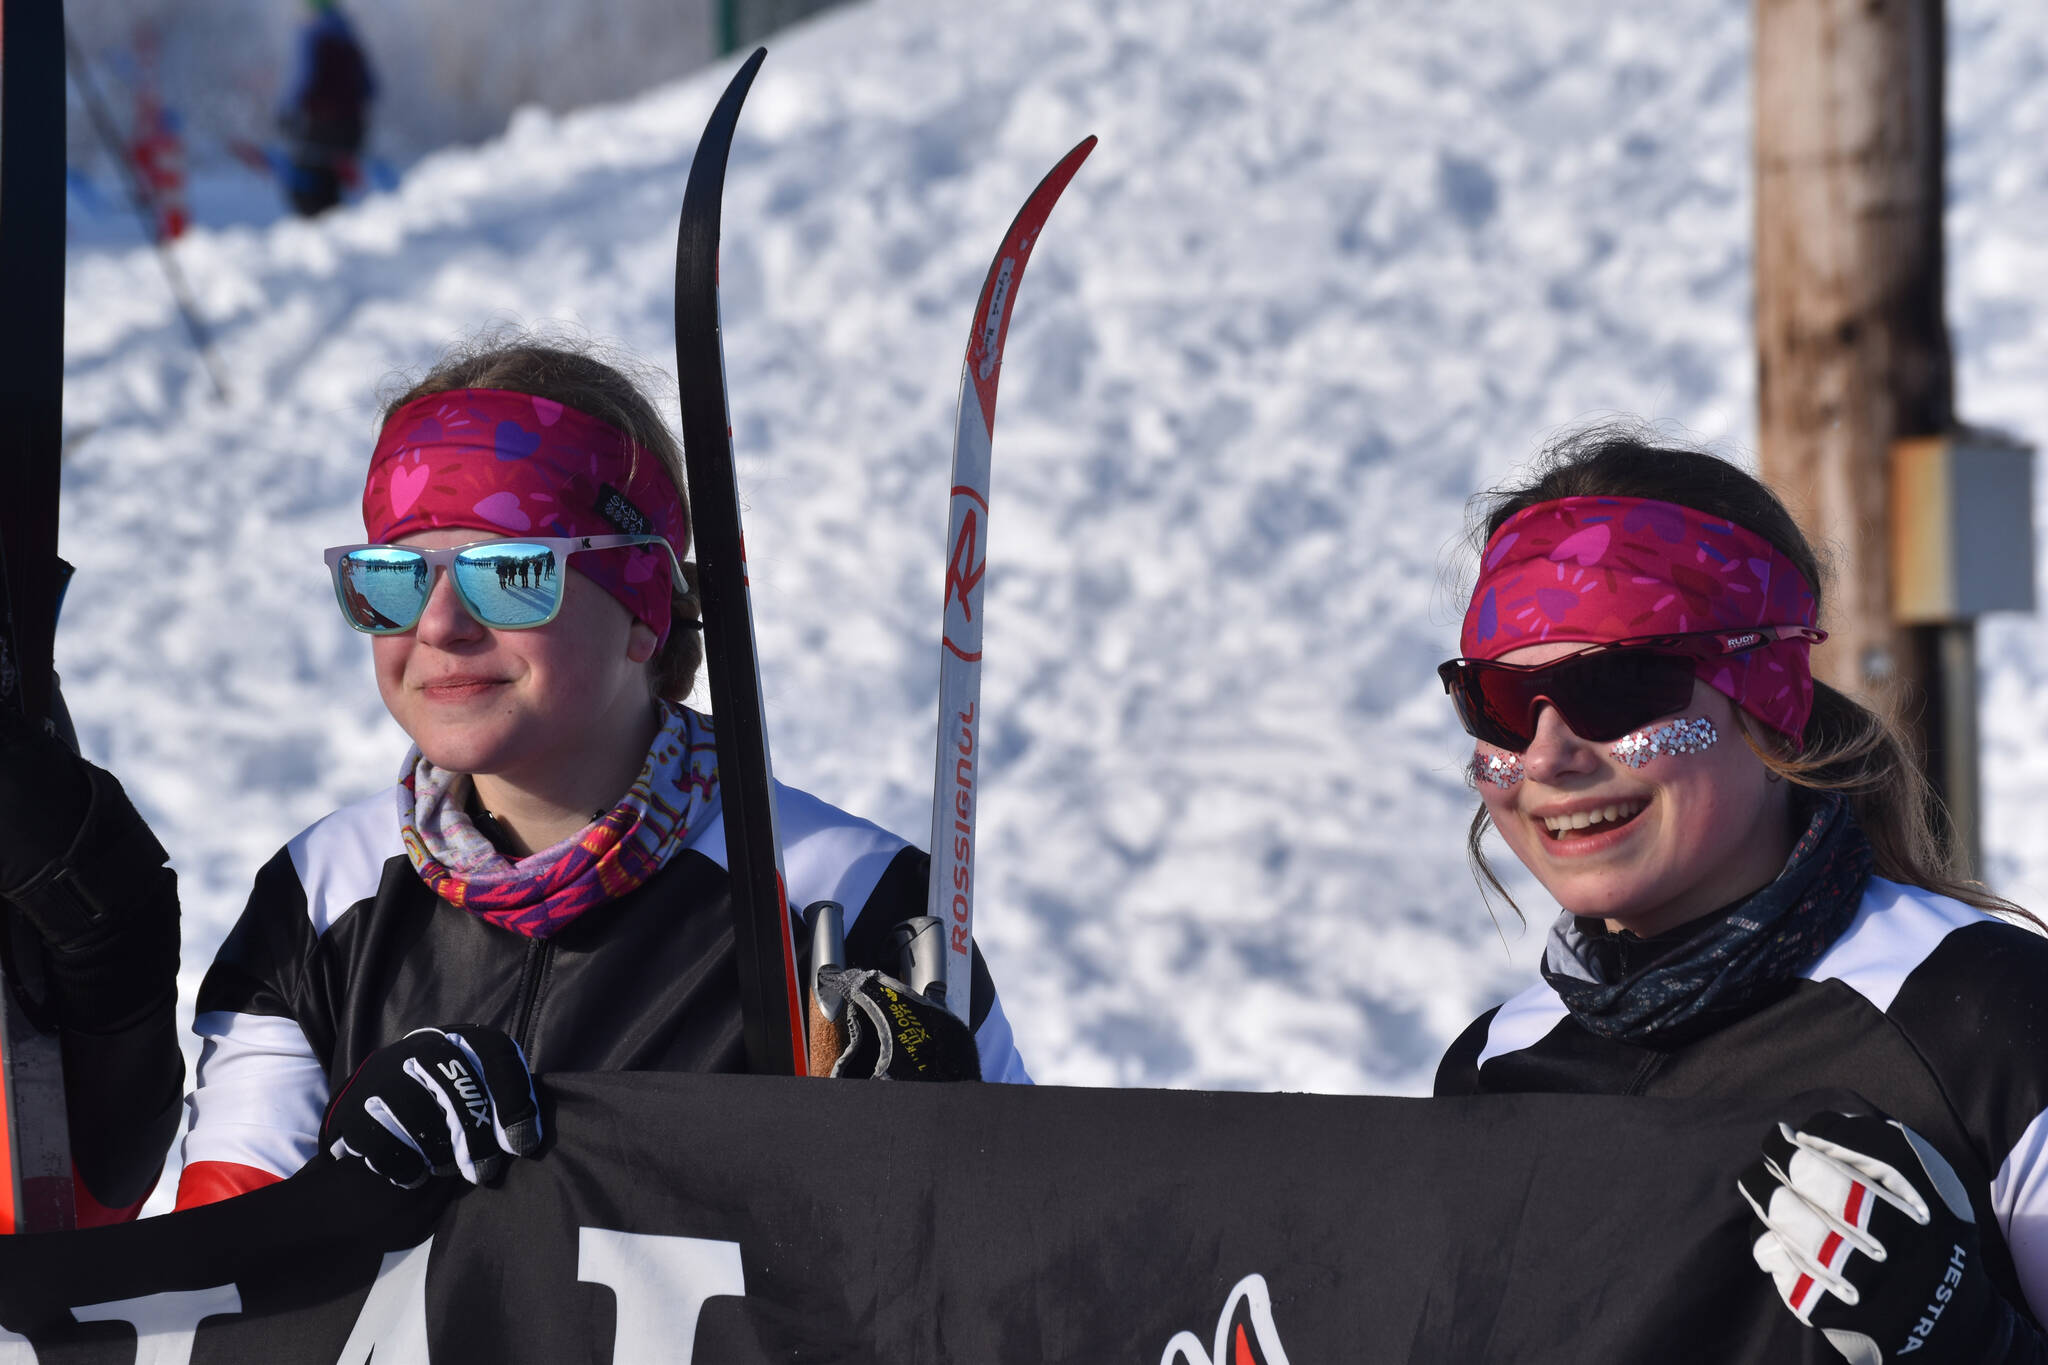 Kenai Central skiers Lynnea Hack and Madison McDonald celebrate finishing the girls 4x3.5-kilometer relay, their last race at the ASAA State Nordic Ski Championships at Kincaid Park in Anchorage, Alaska, on Saturday, Feb. 25, 2023. (Jake Dye/Peninsula Clarion)